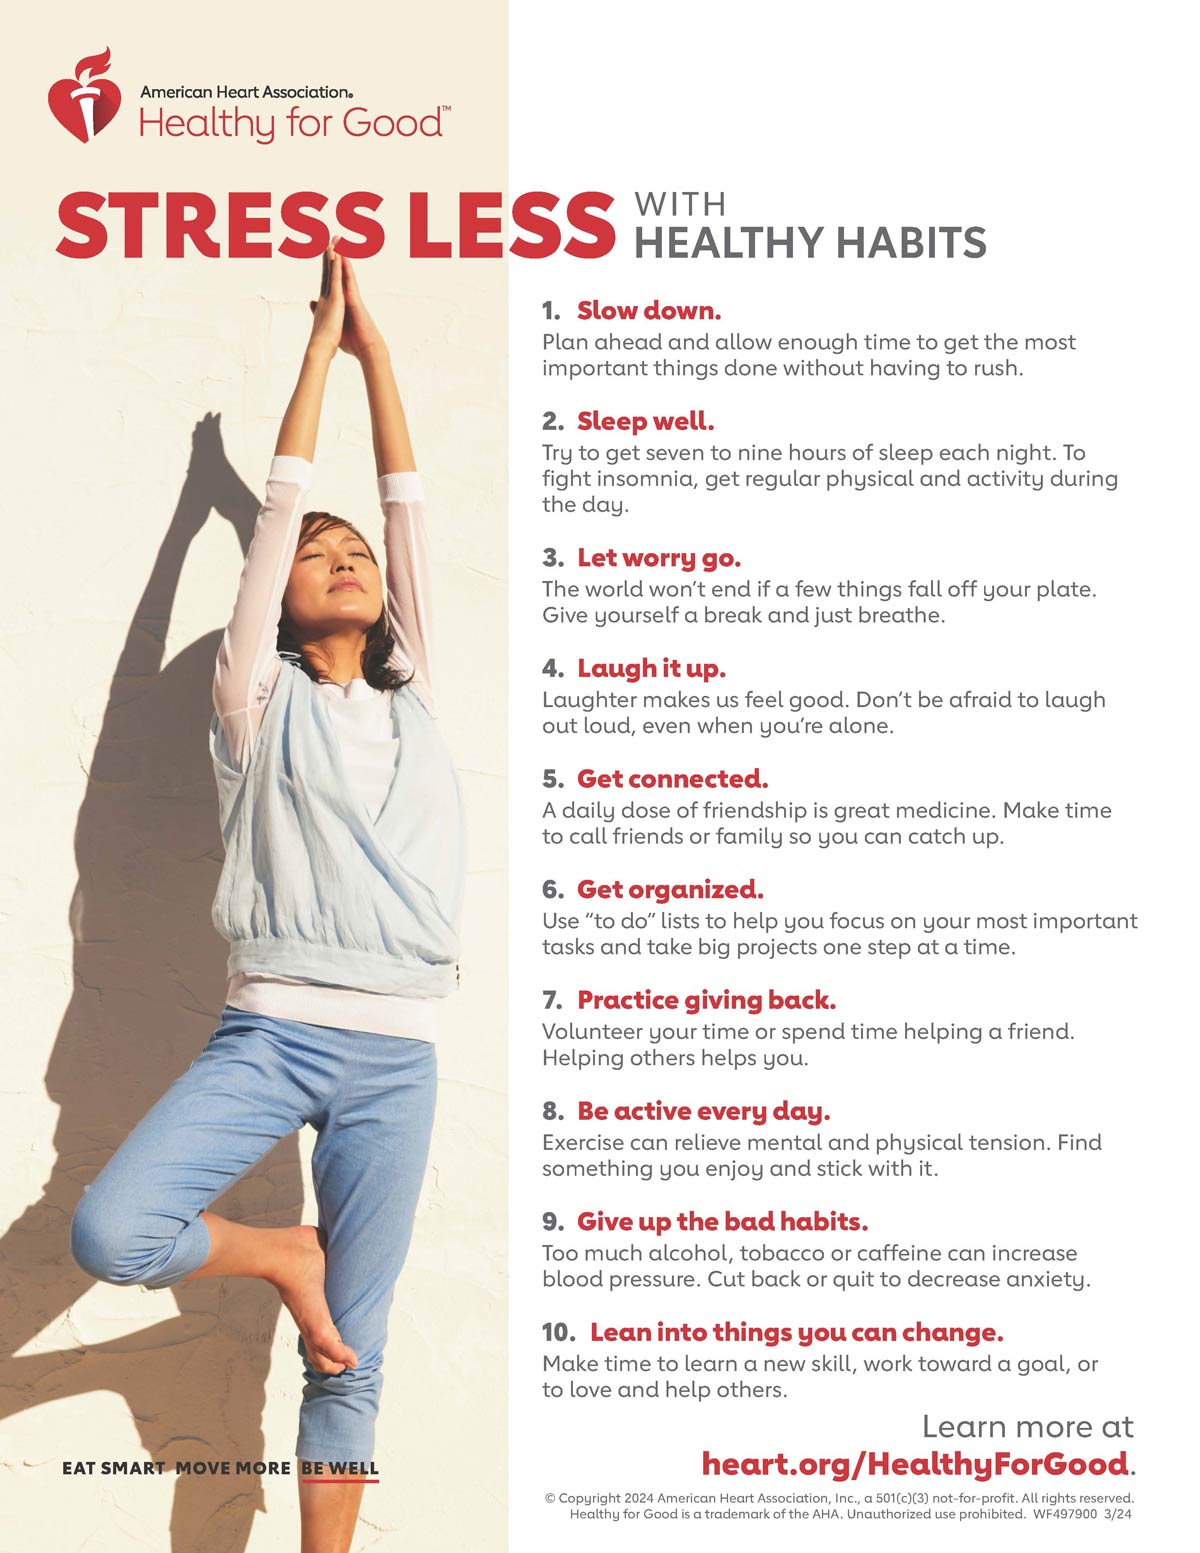 Stress Less with Healthy Habits infographic